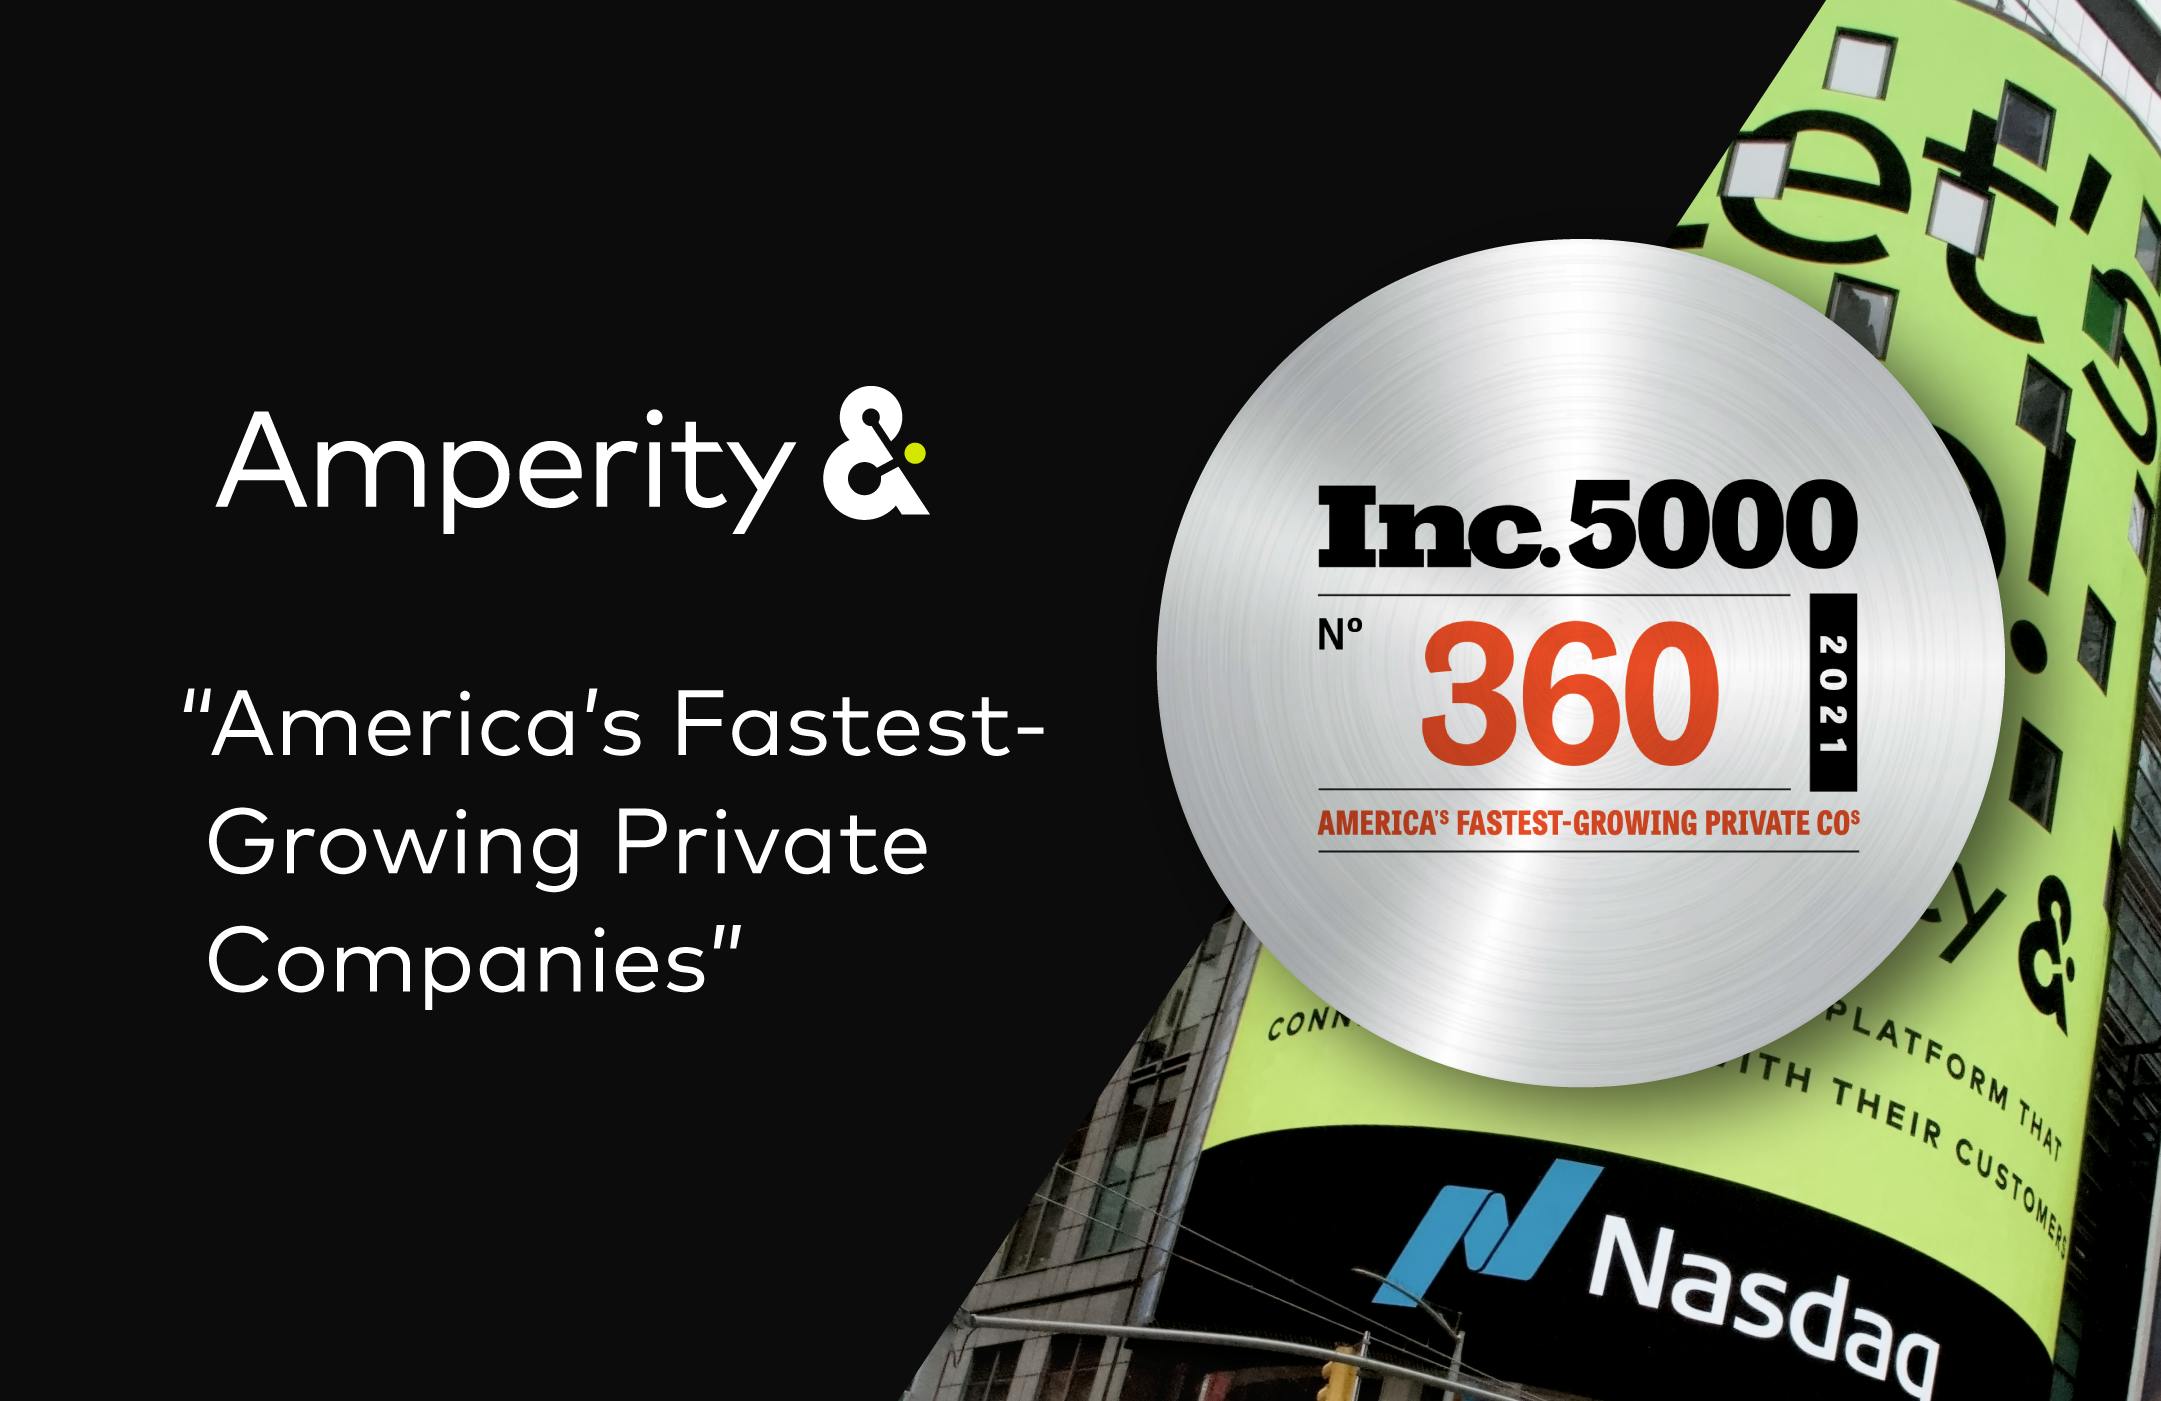 Inc 5000: Amperity in America's Fasted-Growing Private Companies